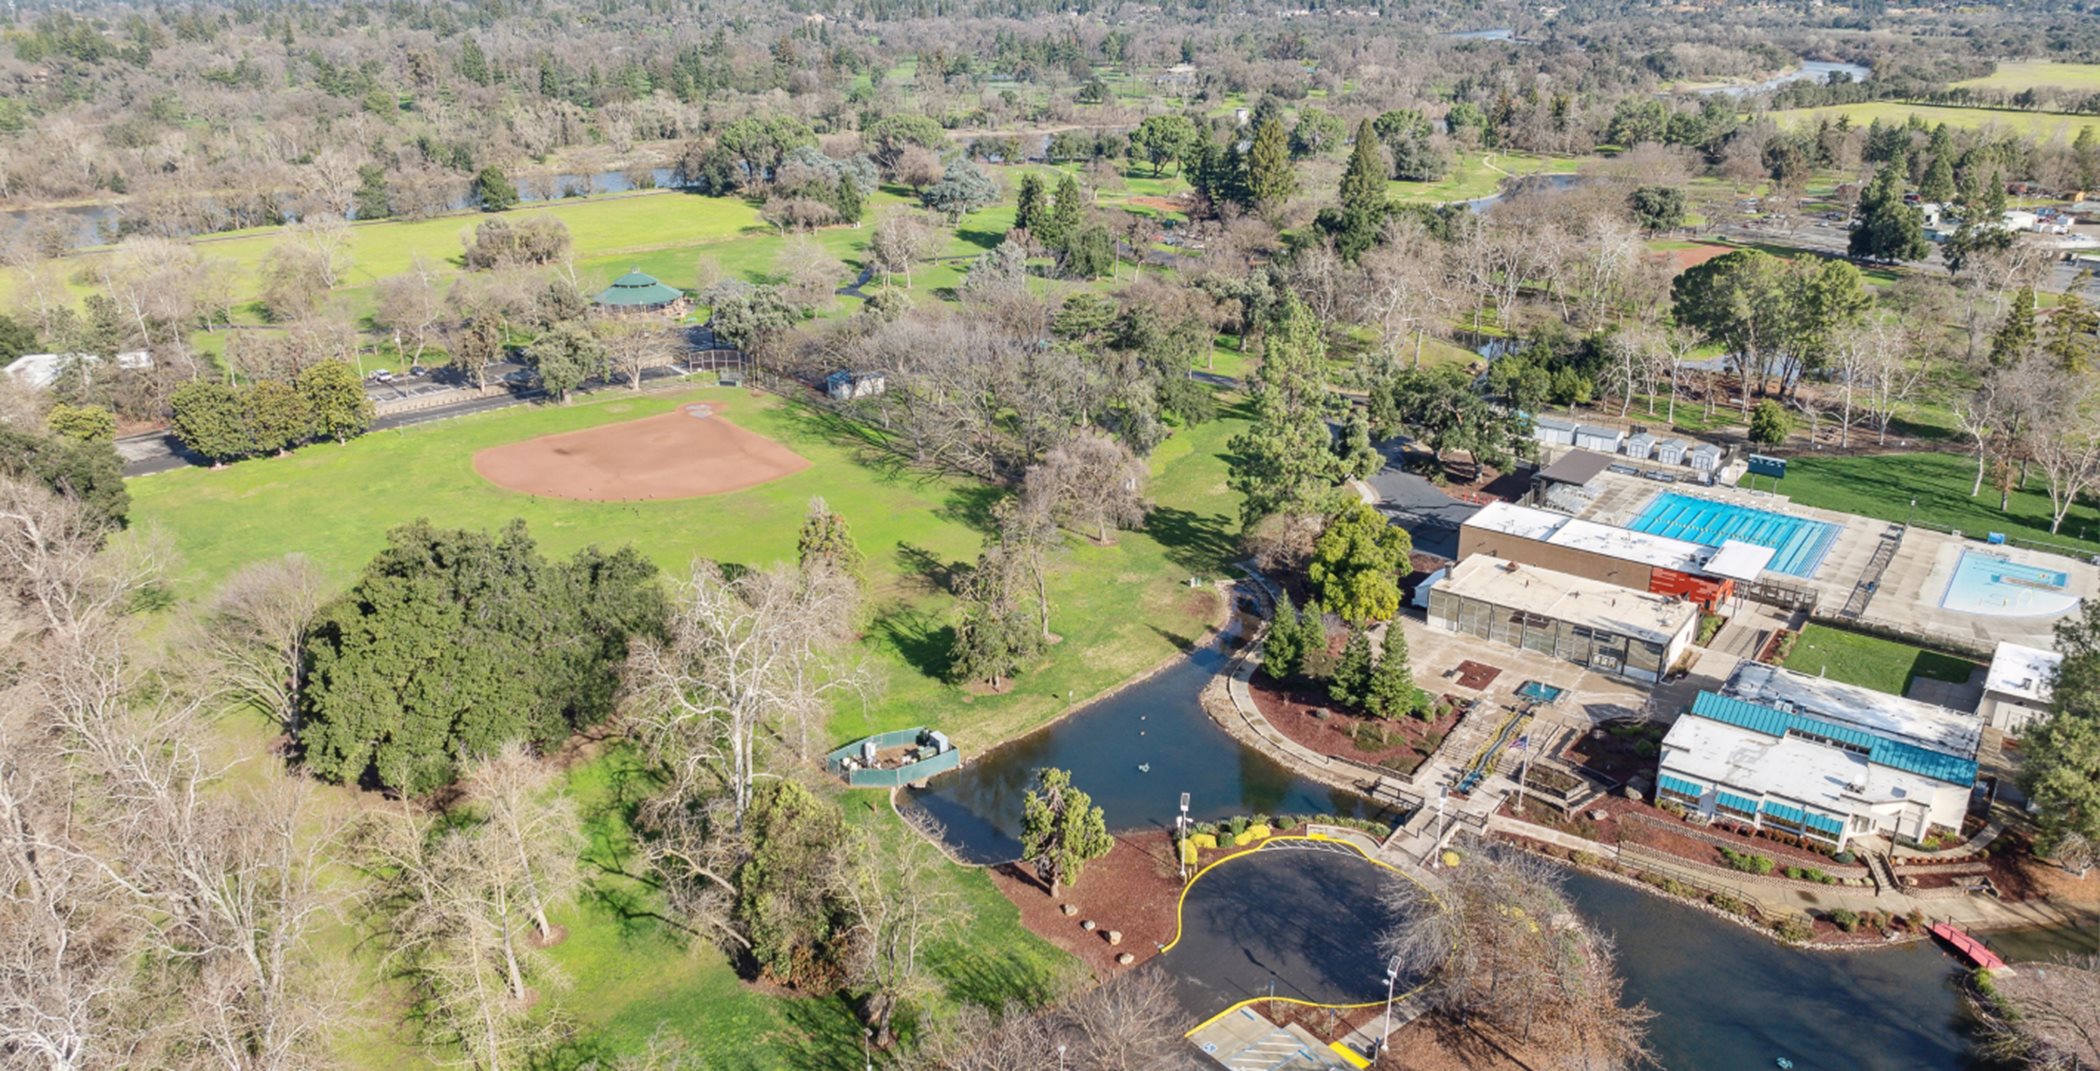 Aerial view of the park showing the baseball field and recreational buildings